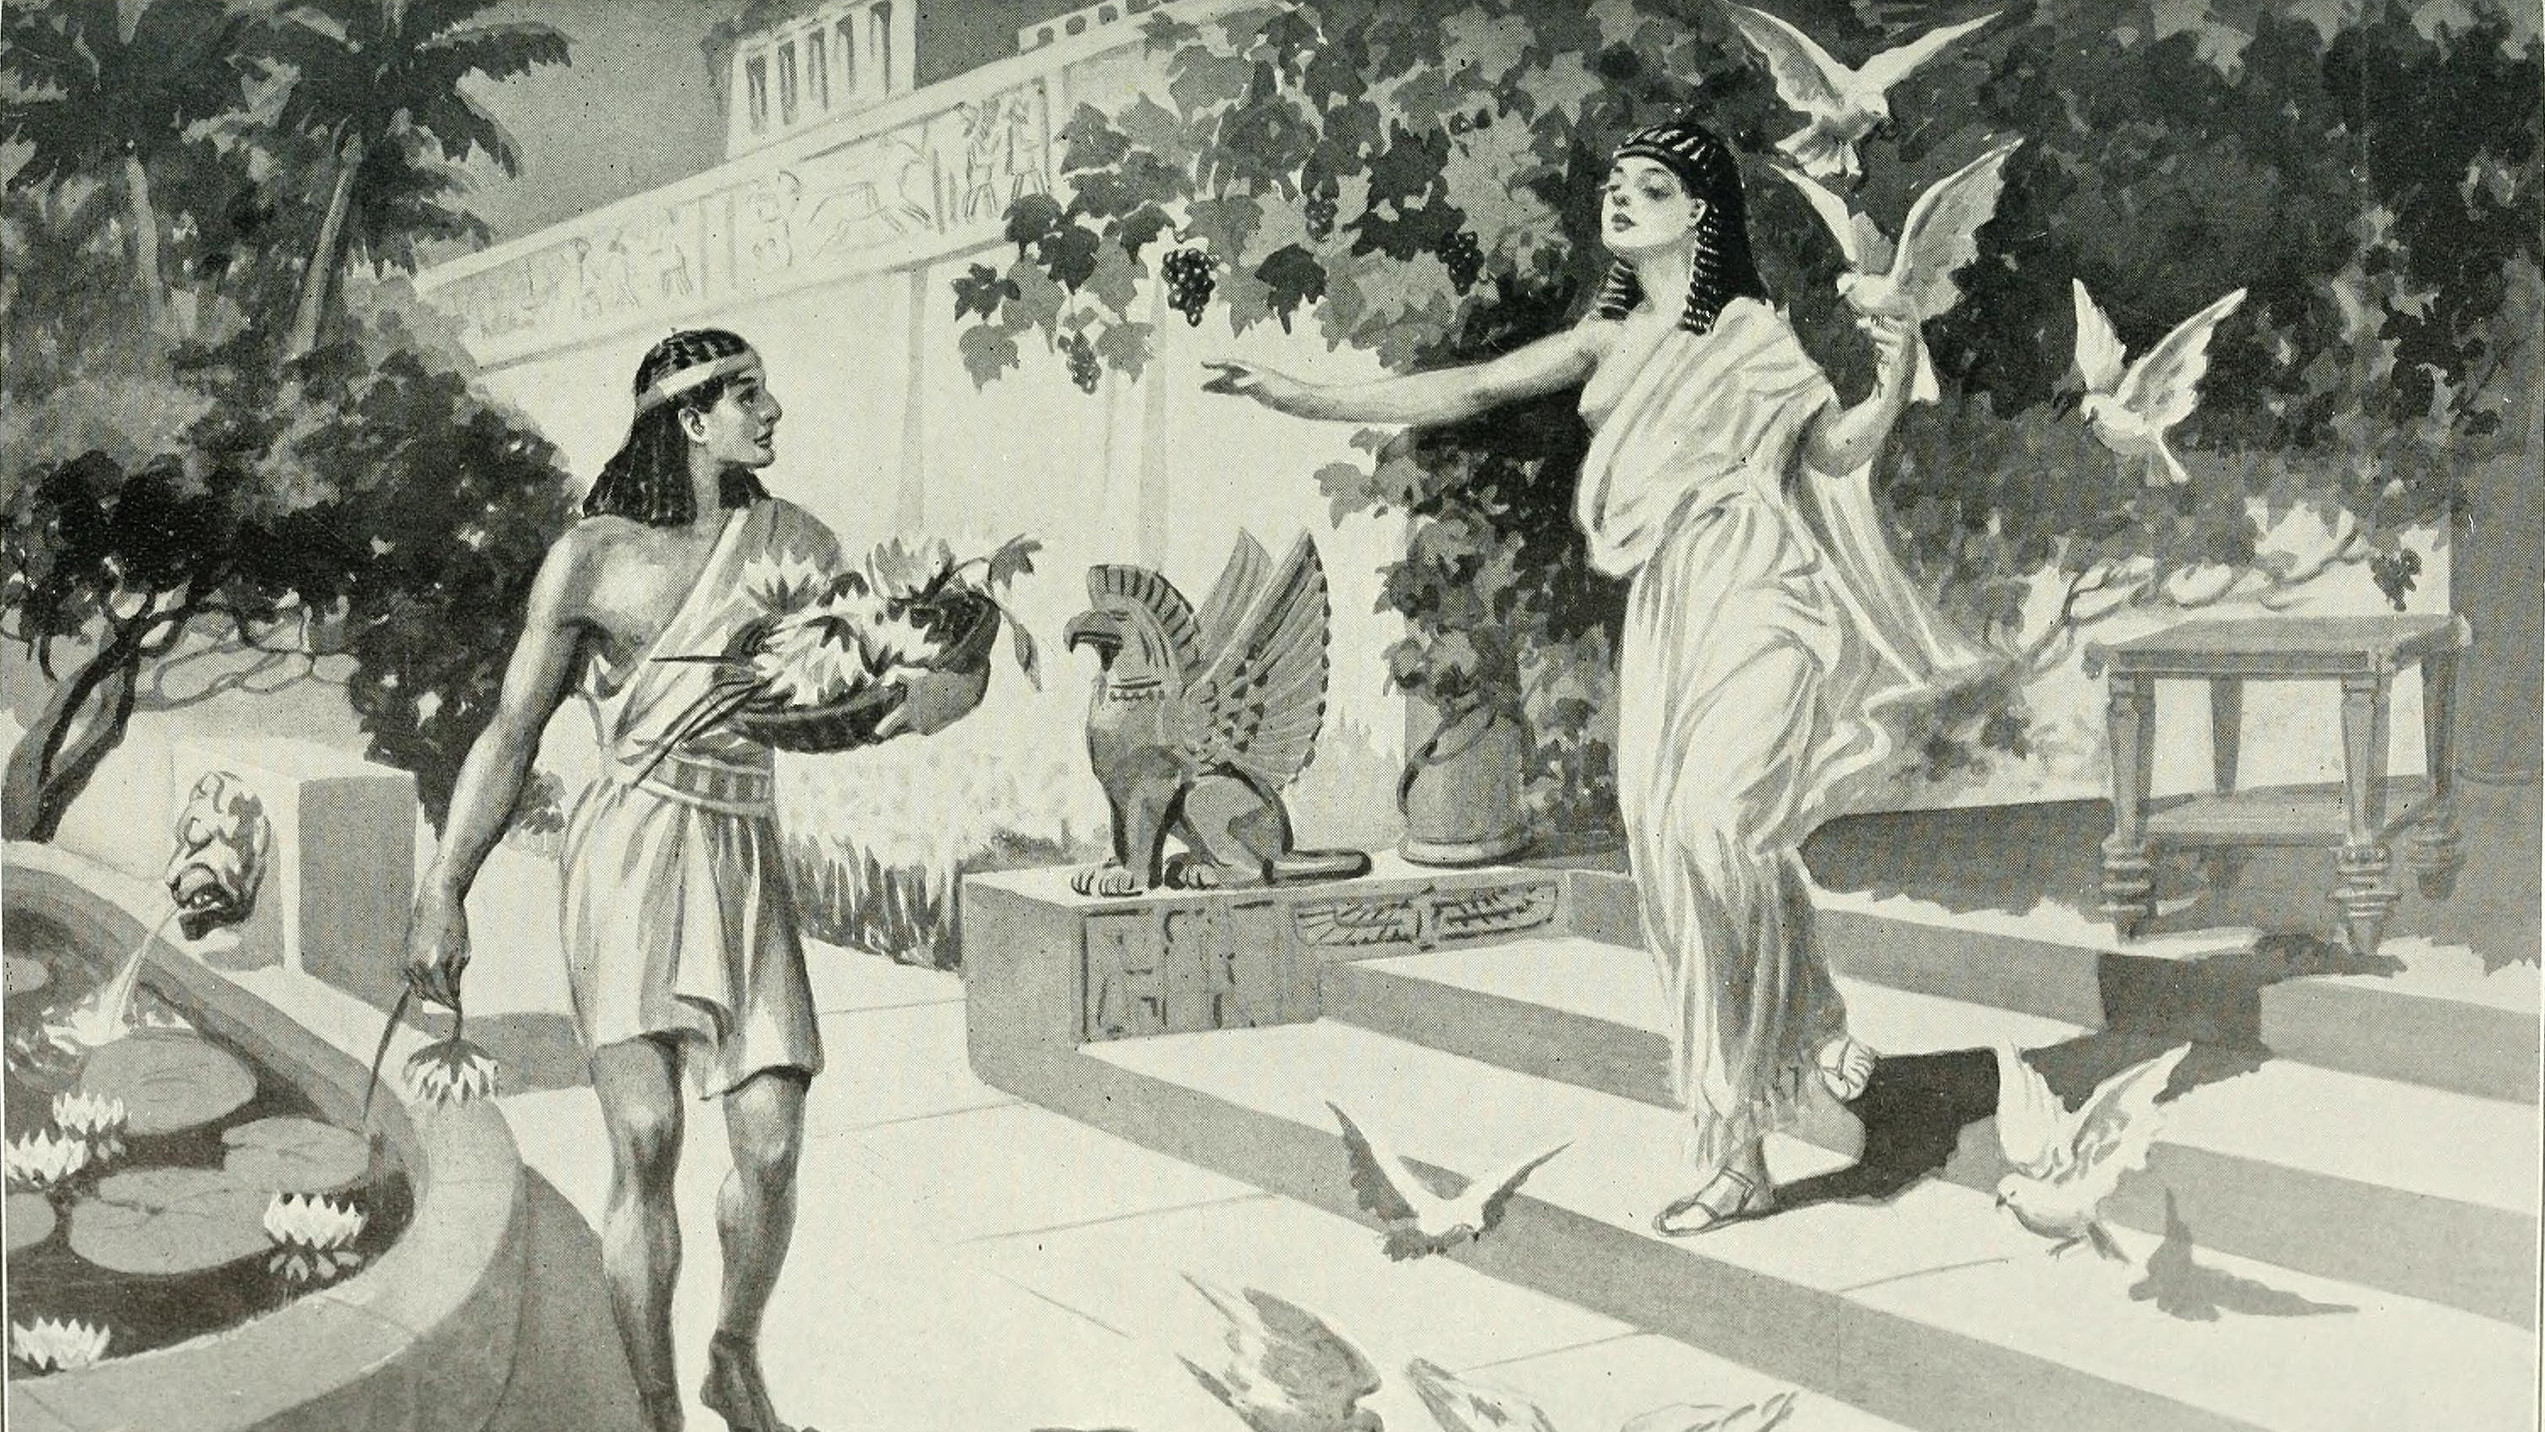 "The Legend of Sargon (The Goddess Ishtar Appears to Sargon, the Gardener's Lad)" By the contempoarary artist, Edwin J. Prittie"